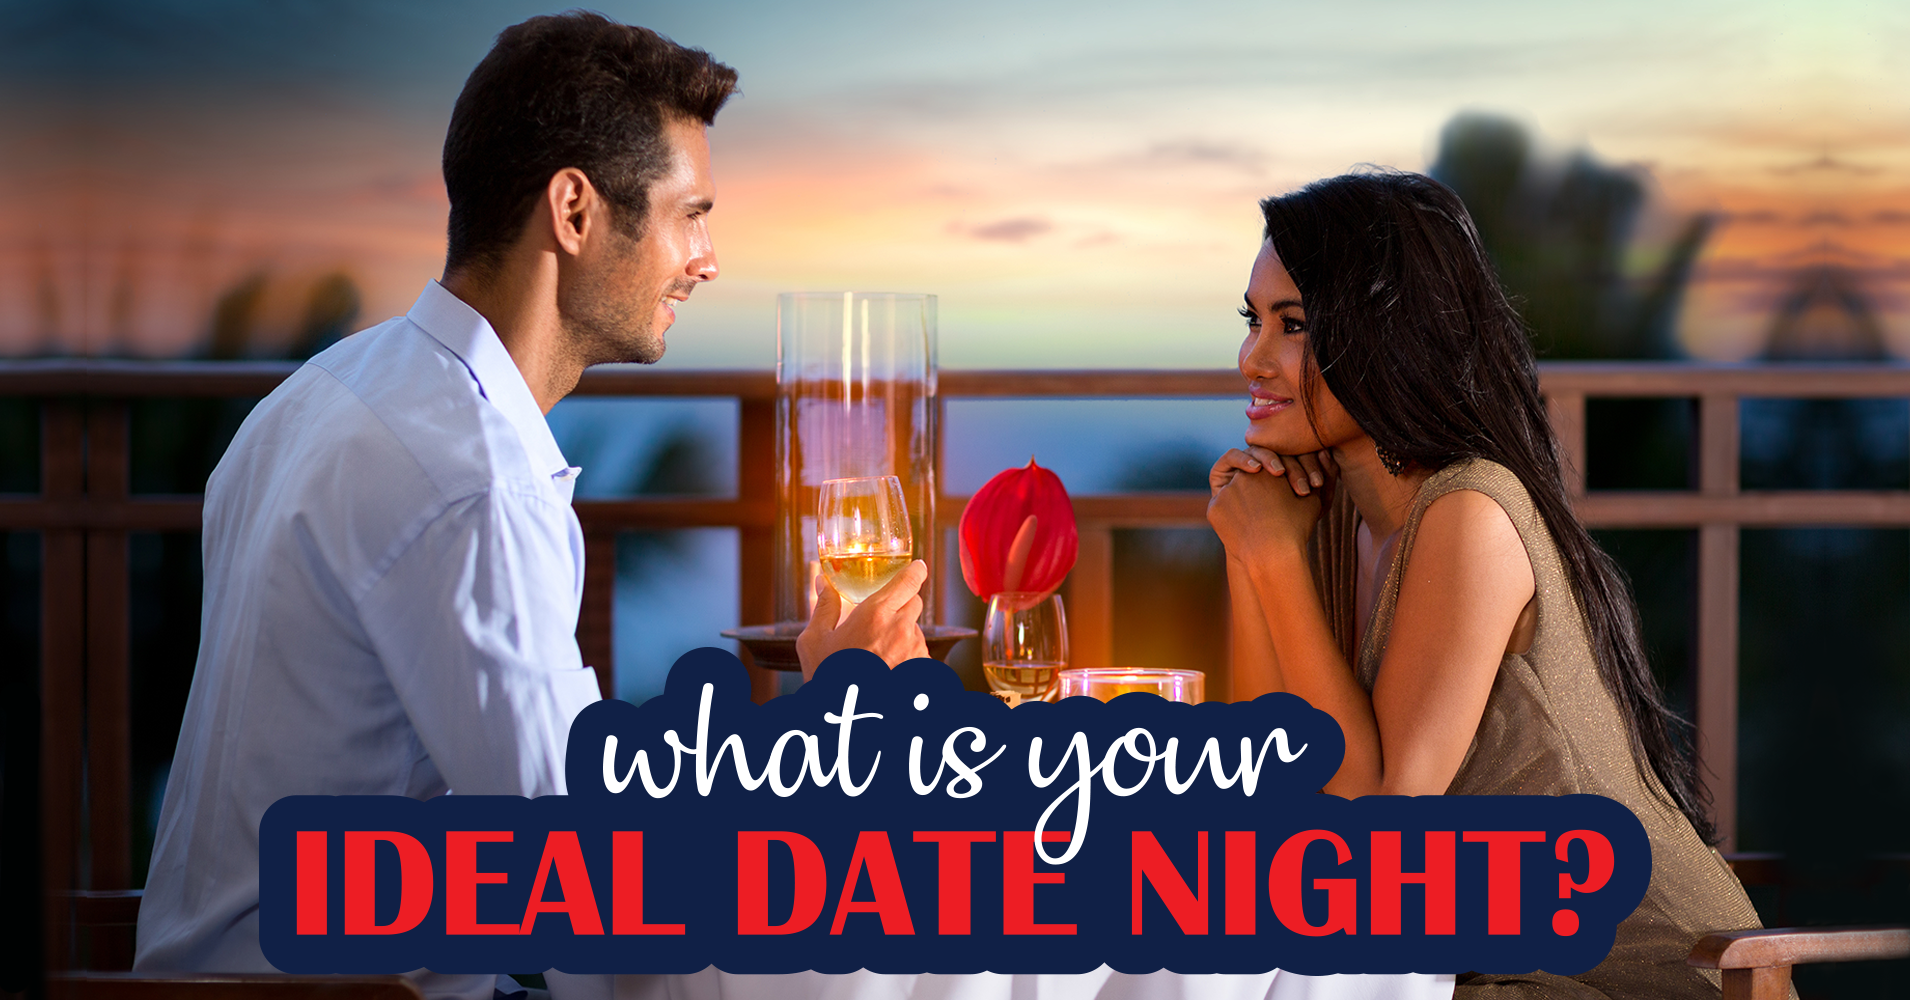 What Is Your Ideal Date Night? - Quiz 